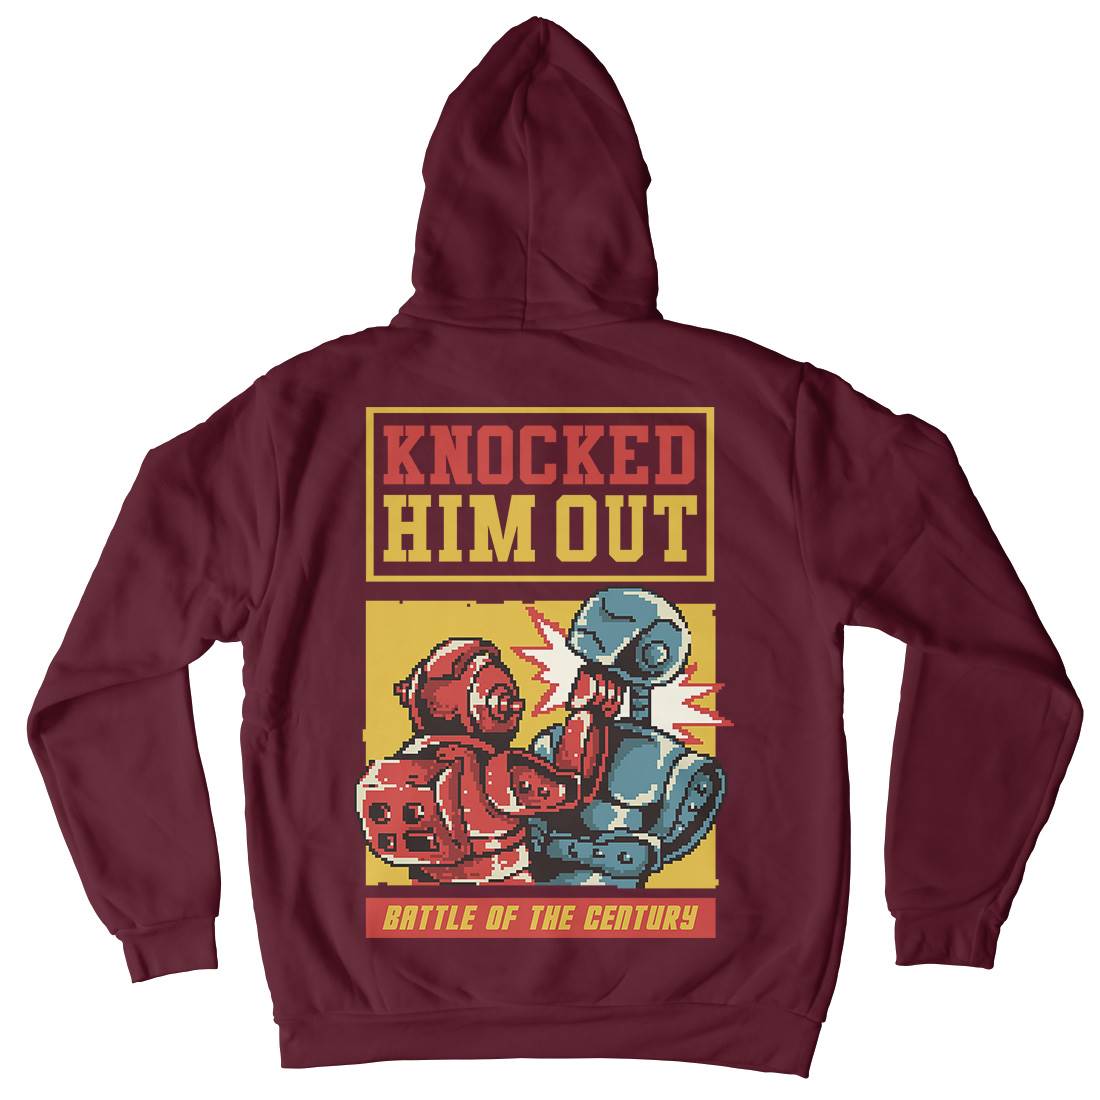 Knocked Him Out Mens Hoodie With Pocket Space B923